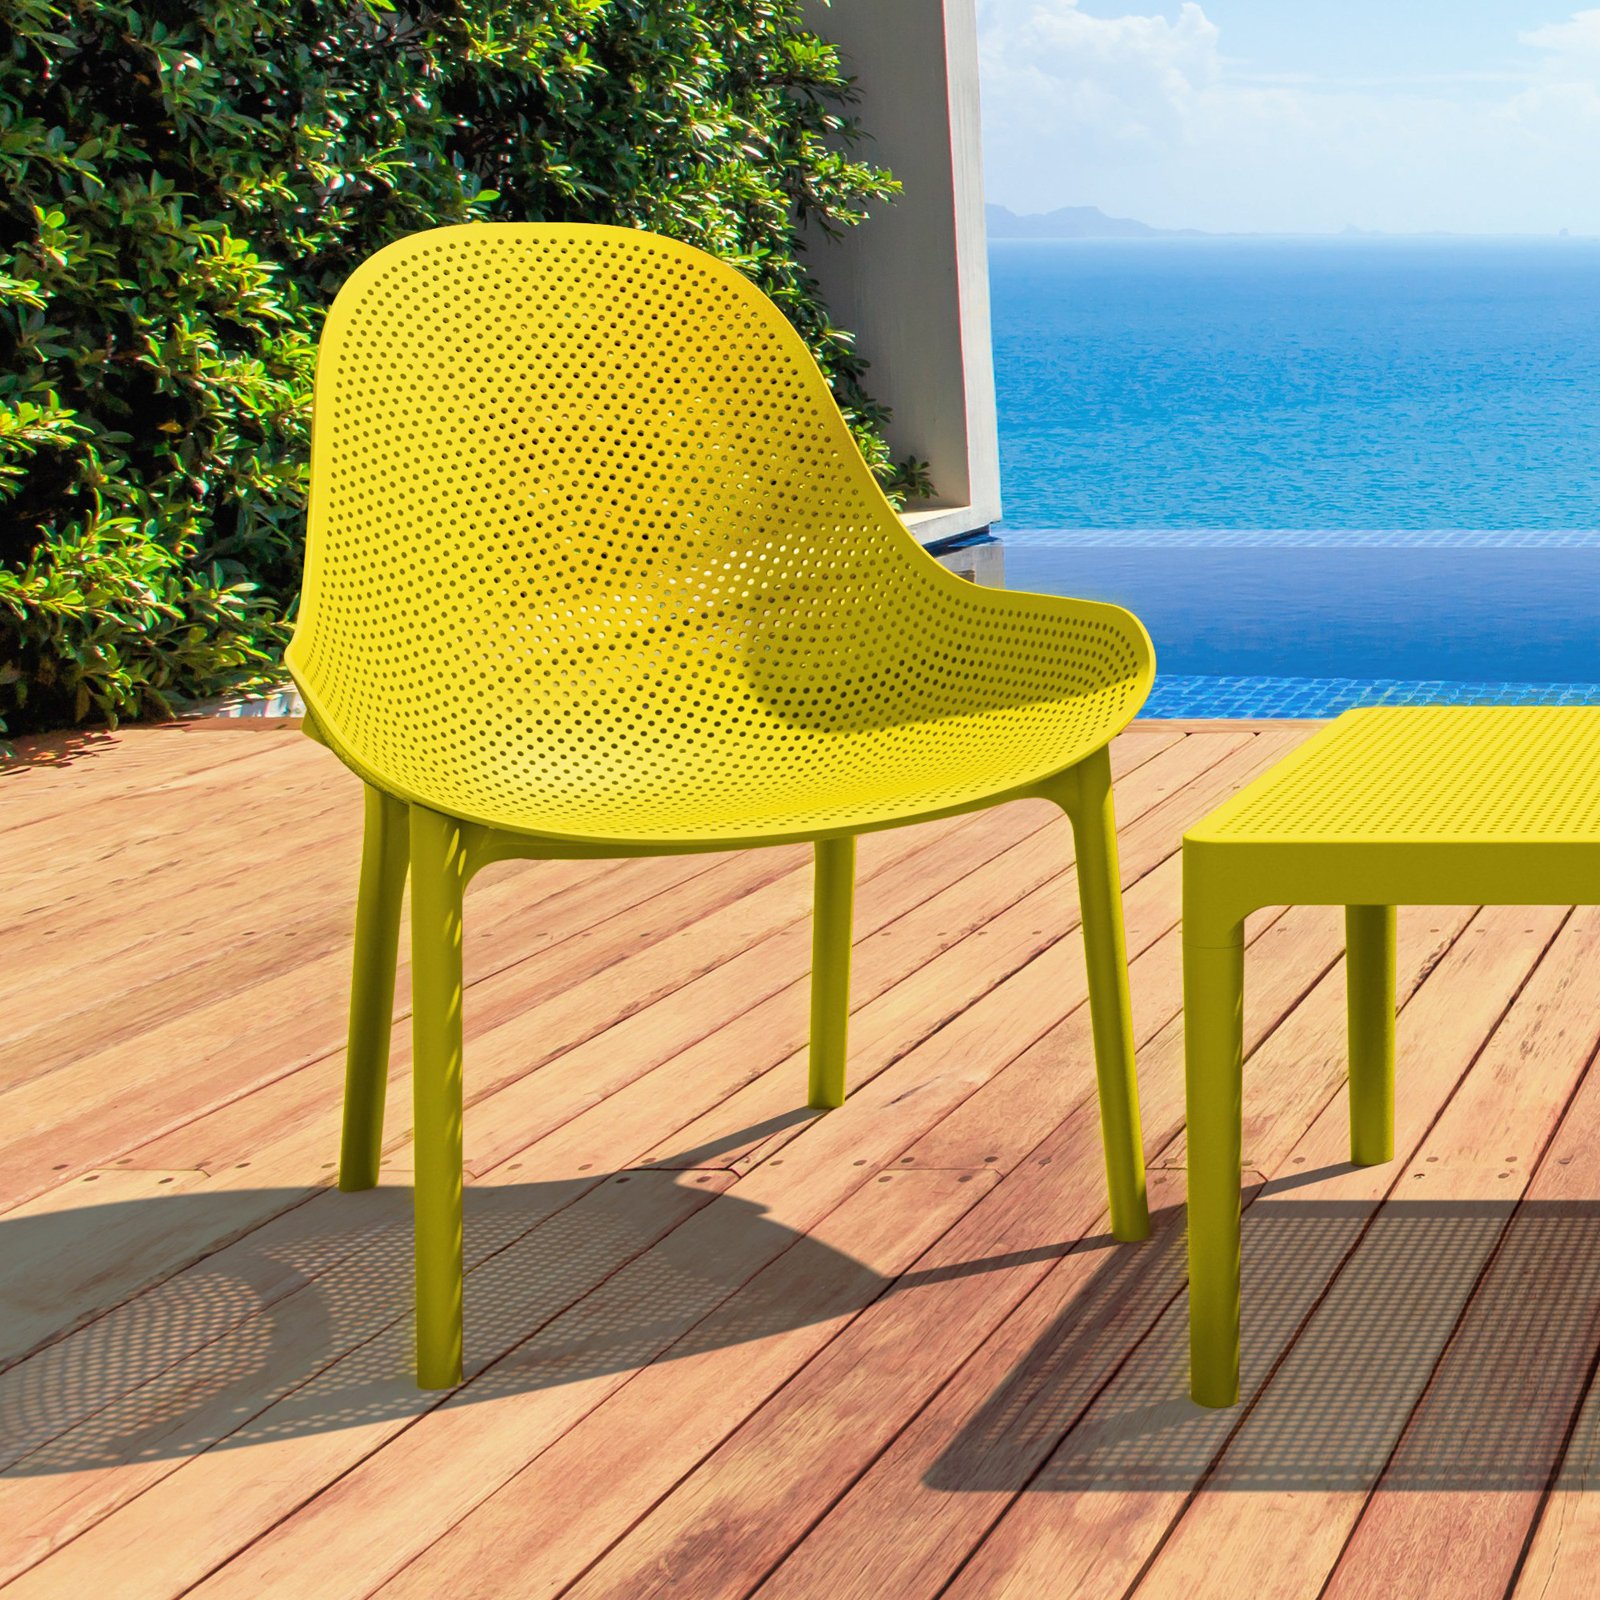 Compamia Sky Patio Chair in Yellow - image 3 of 11